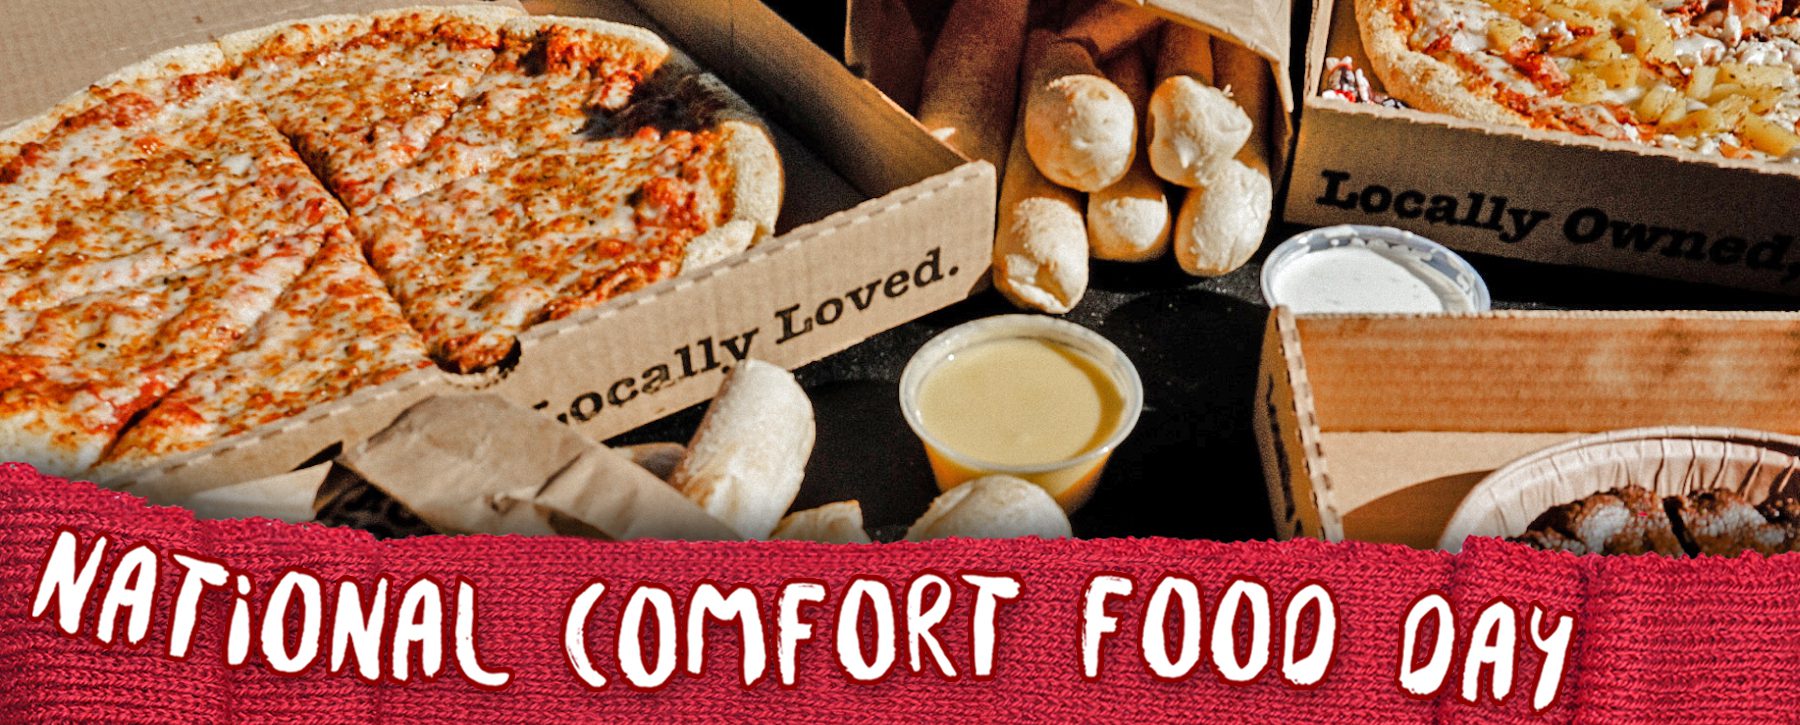 Celebrate National Comfort Food Day at HotBox! HotBox Pizza